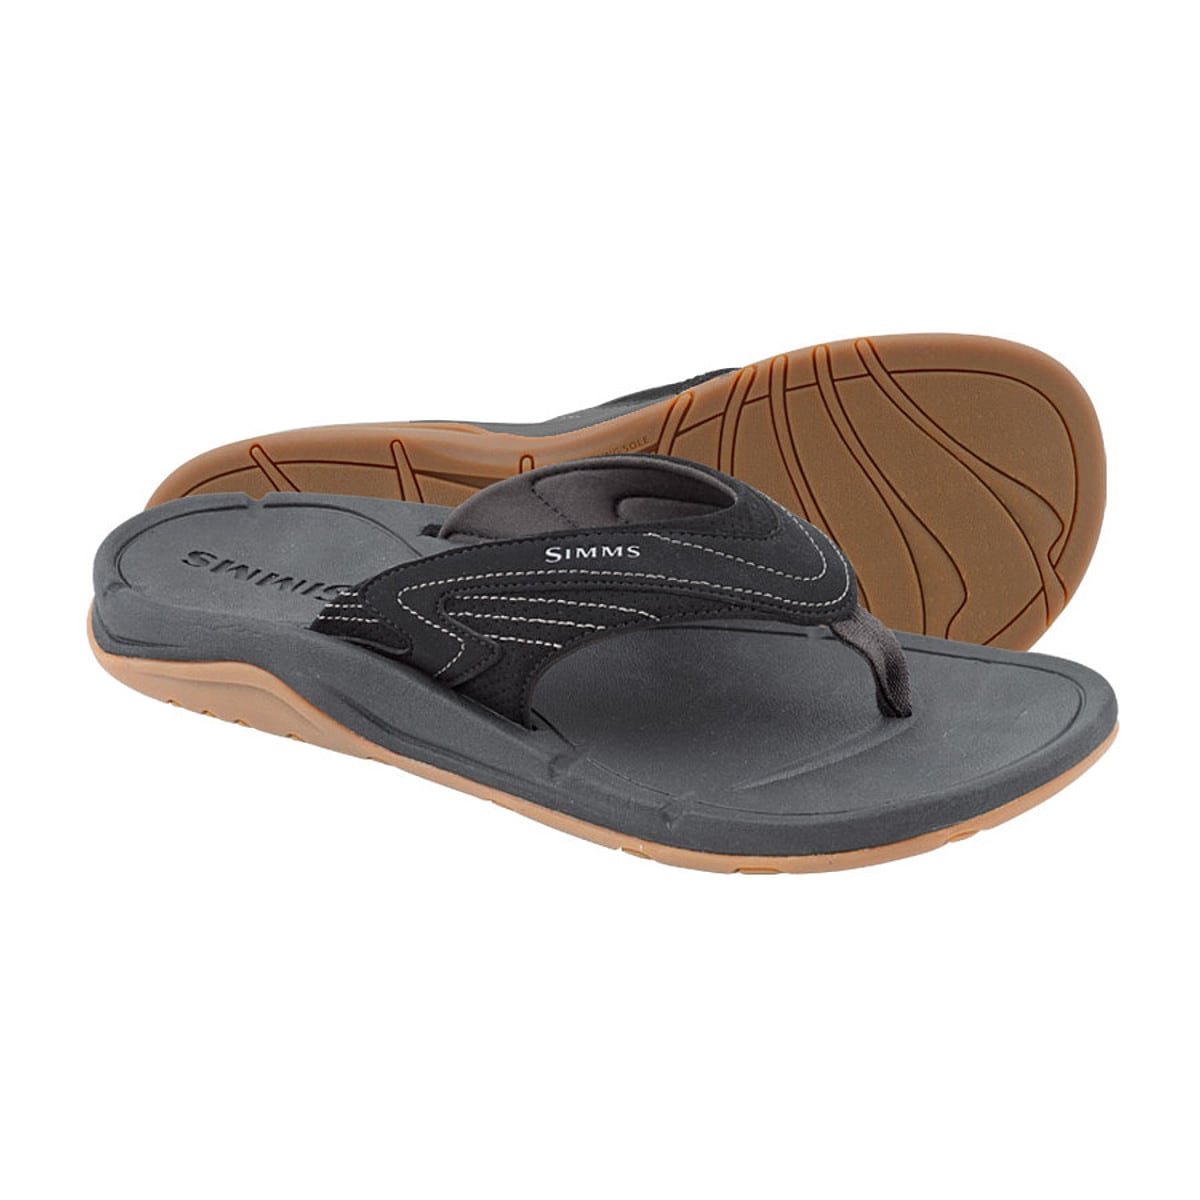 Simms Atoll Flip Flop - Men's - Fly Fishing